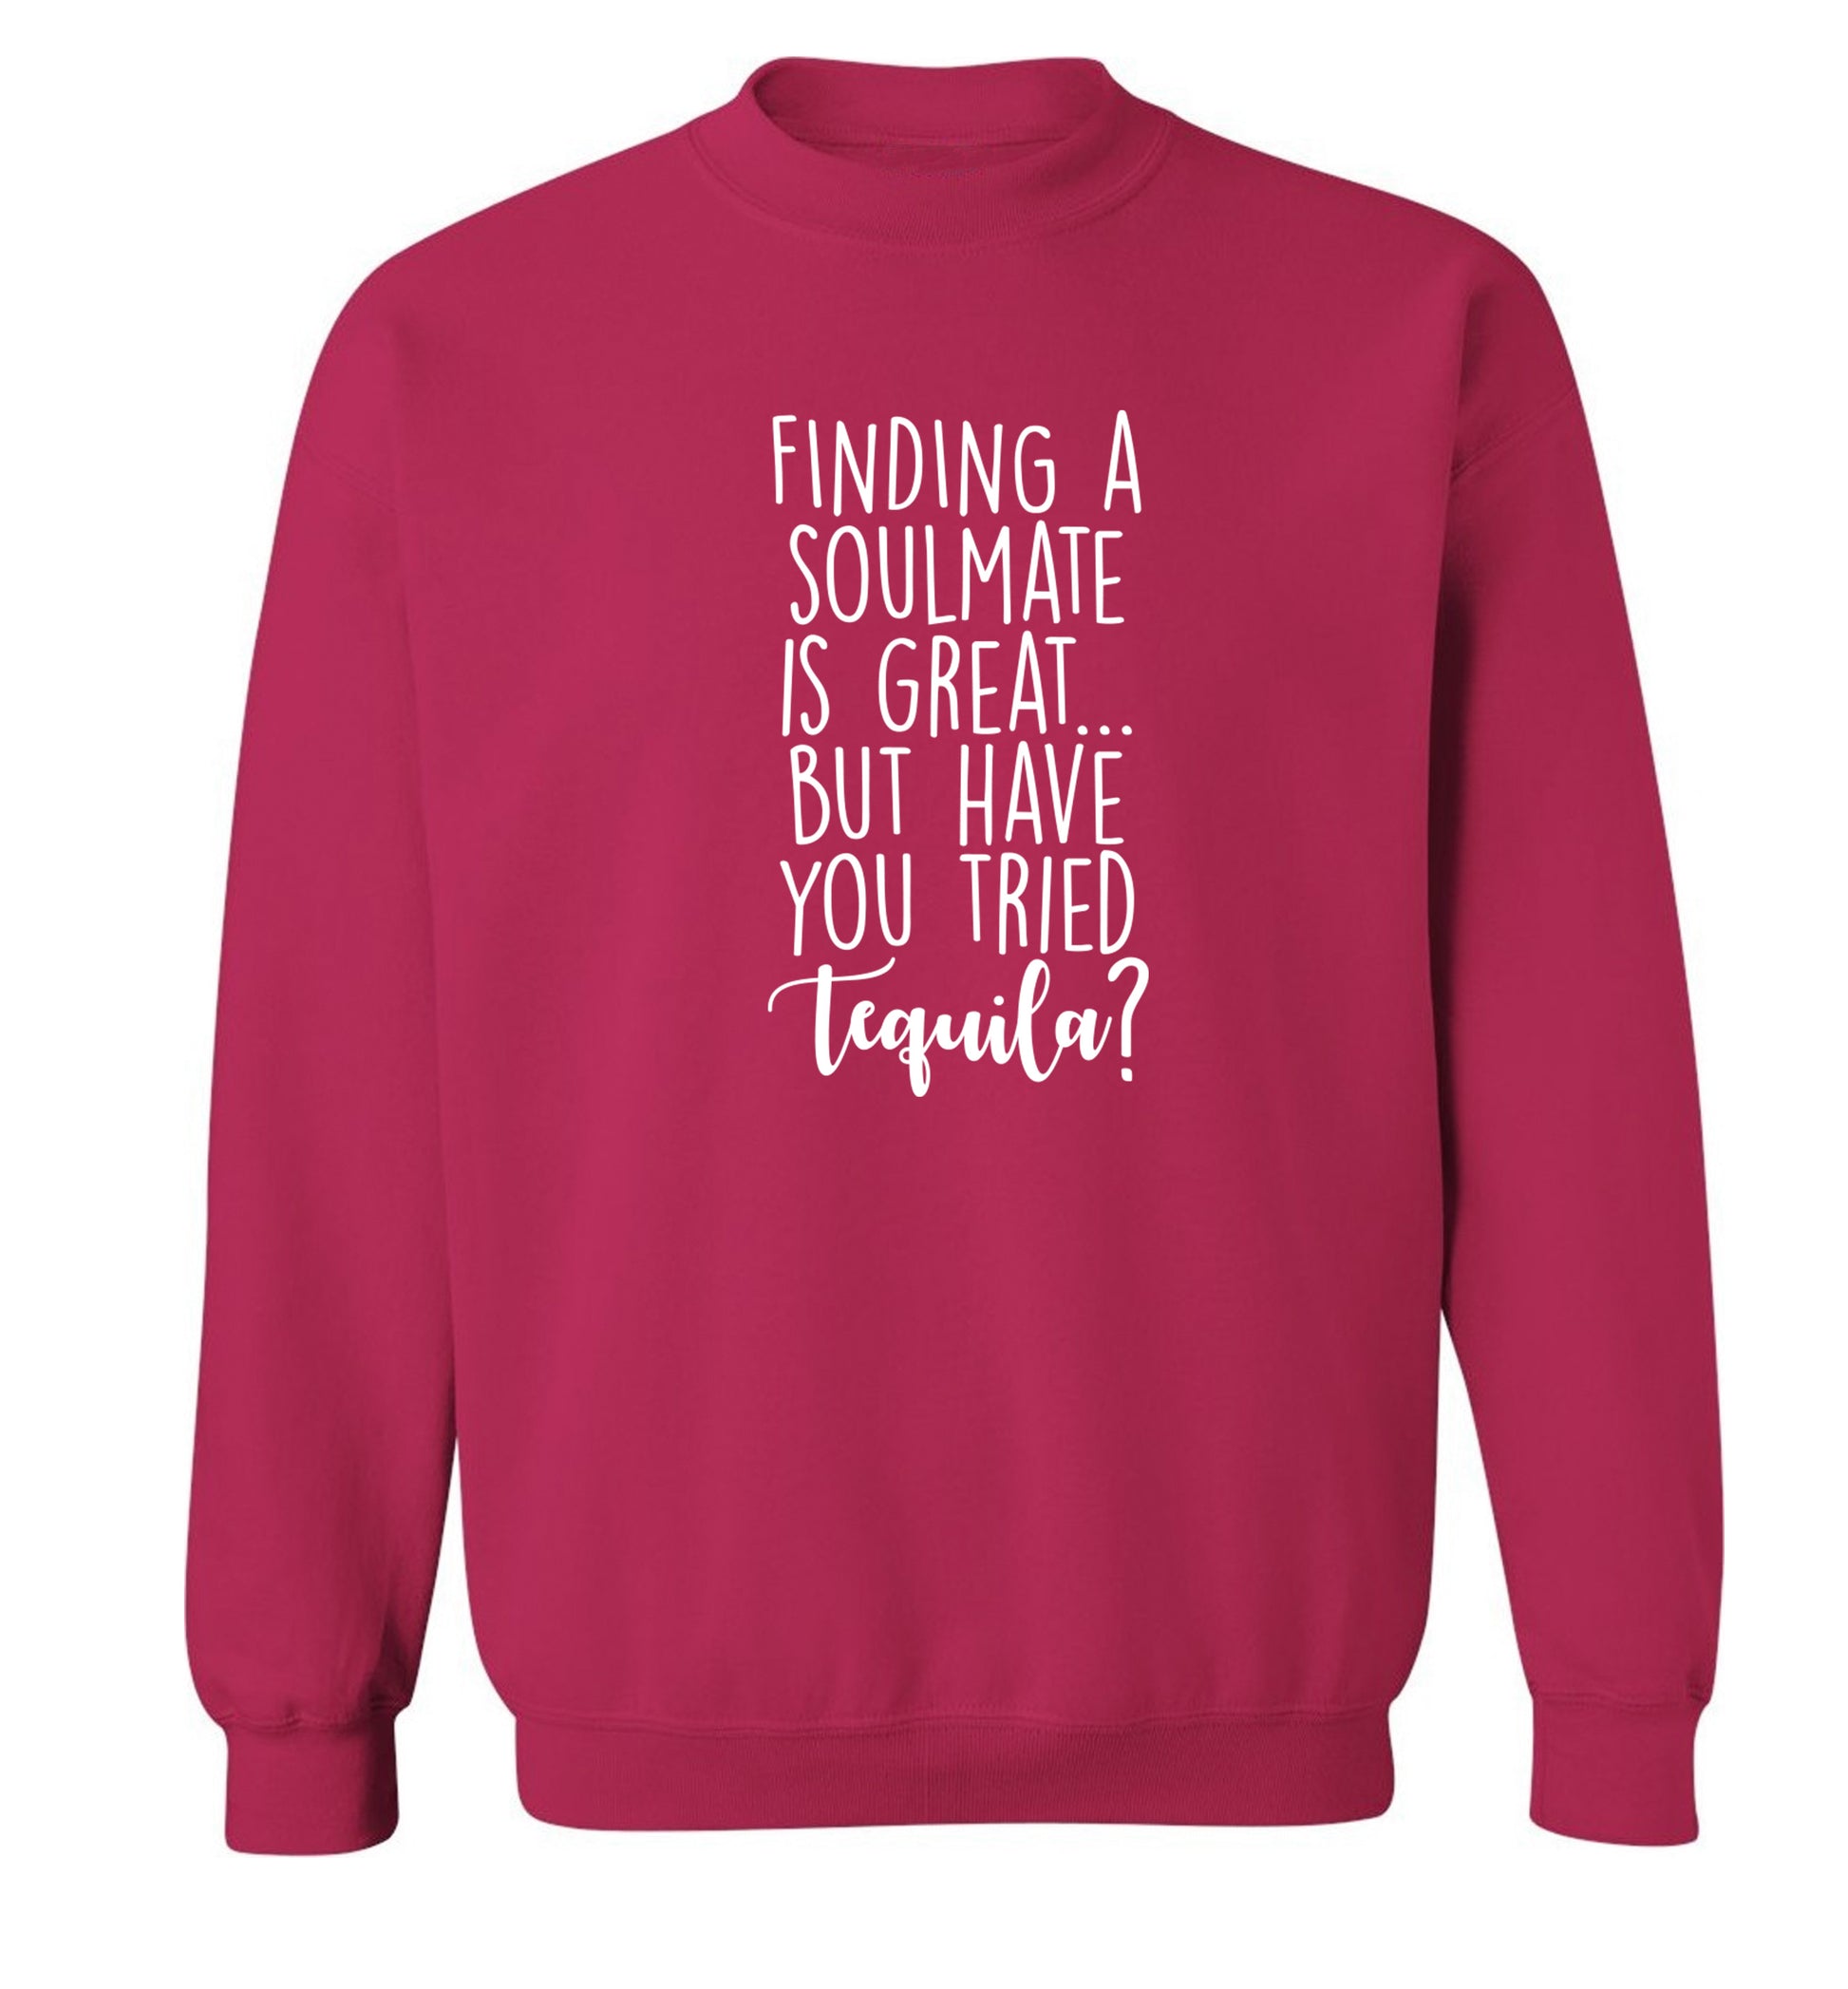 Finding a soulmate is great but have you tried tequila? Adult's unisex pink Sweater 2XL